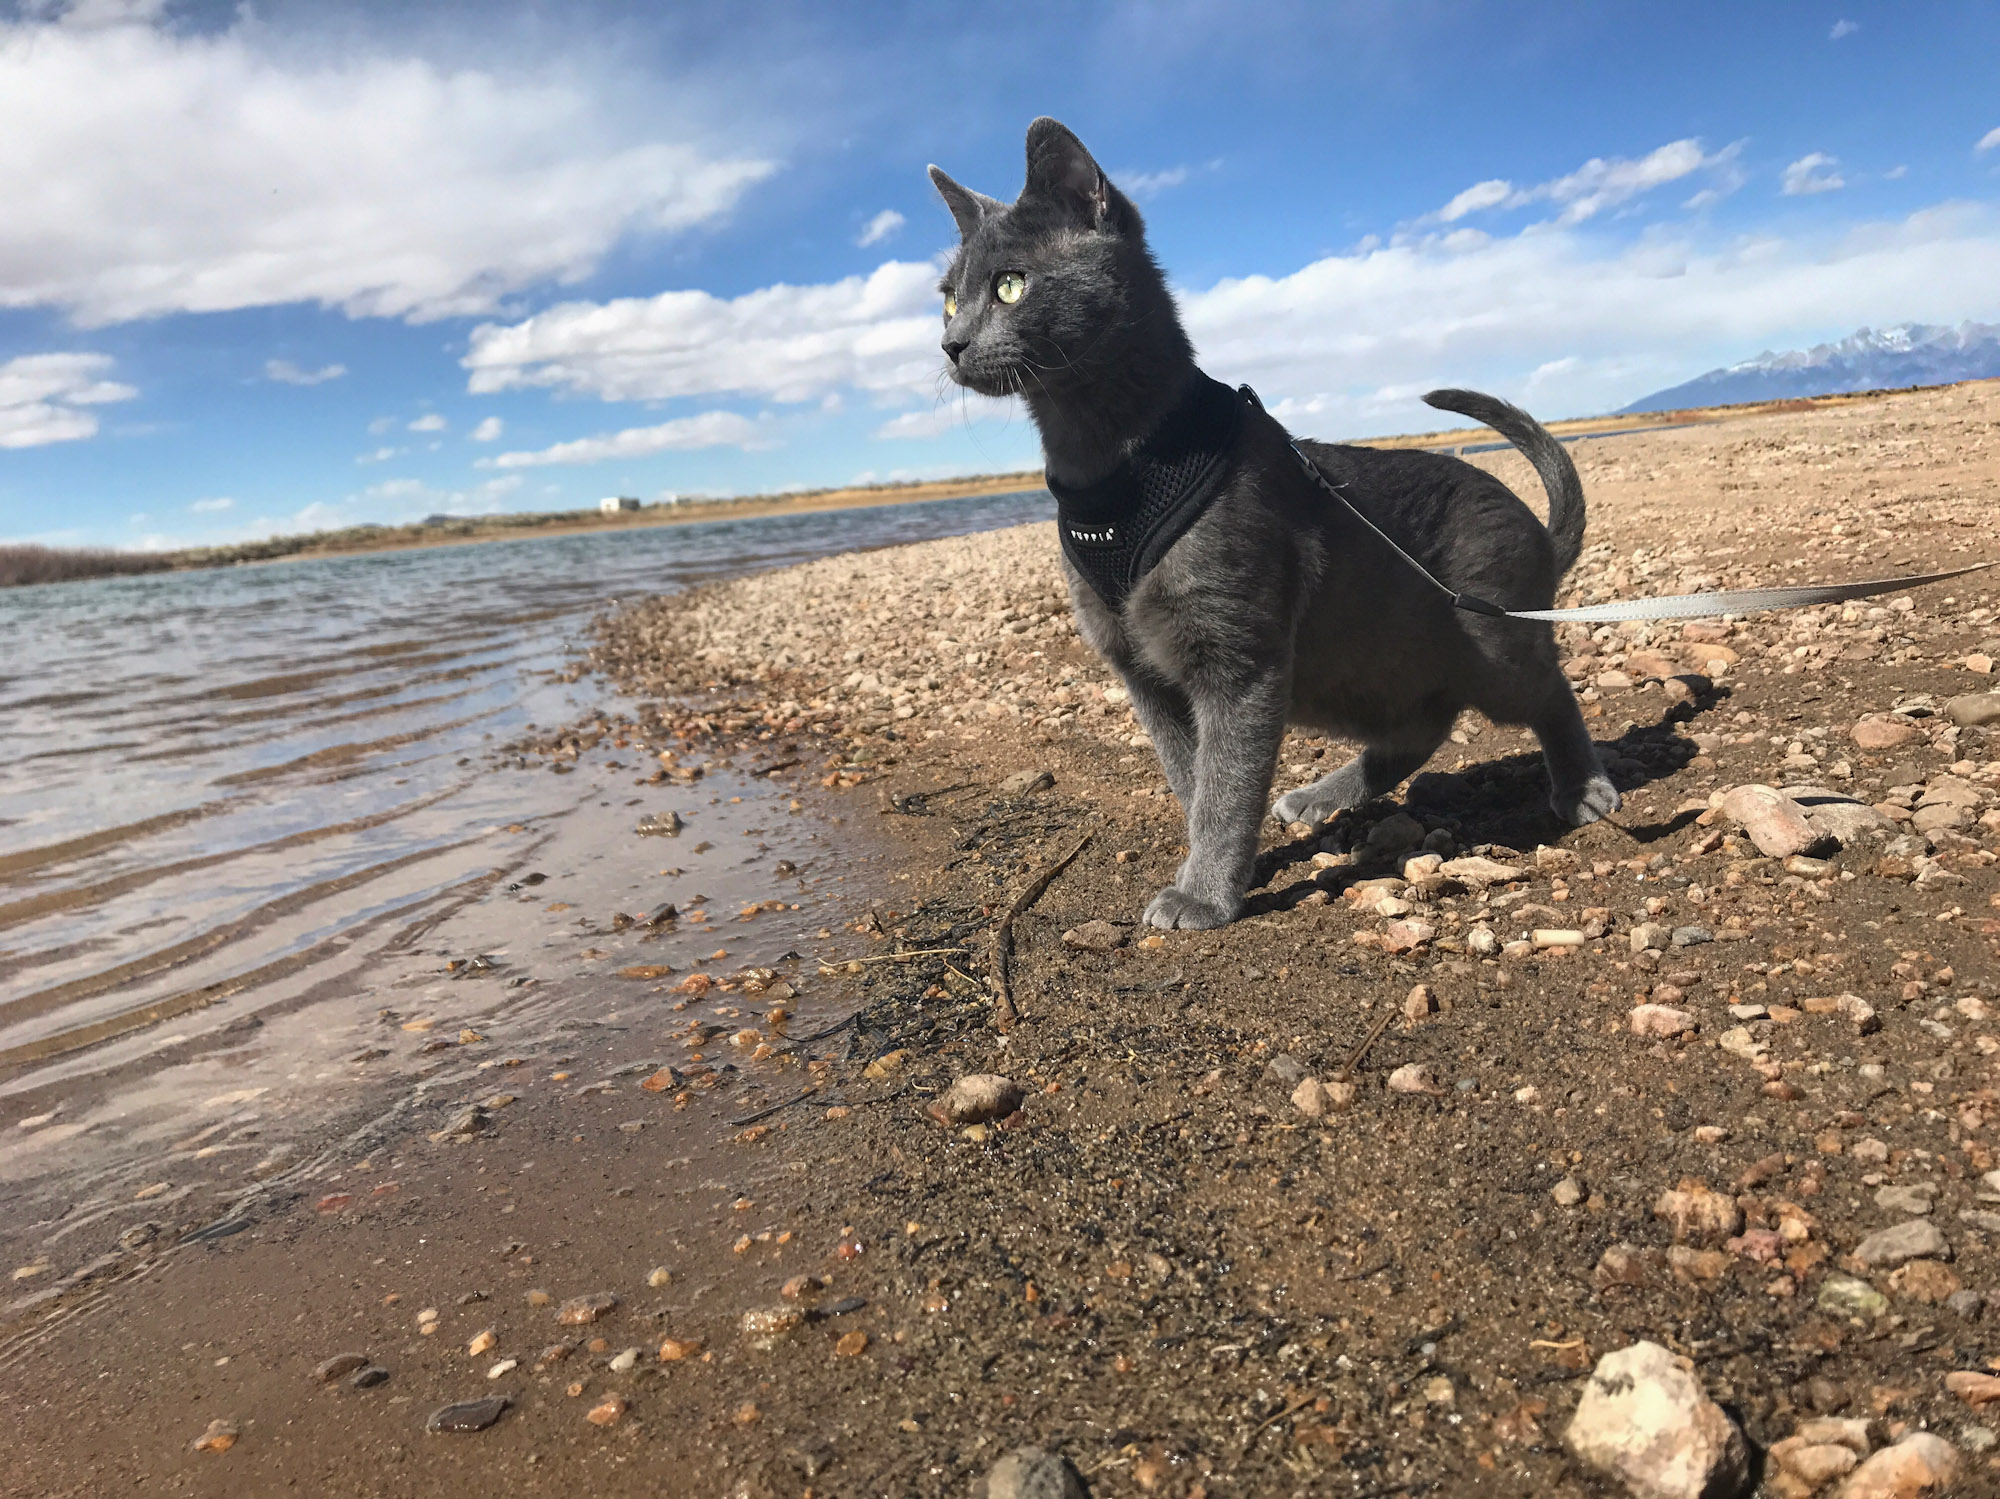 gray cat on harness approaches water